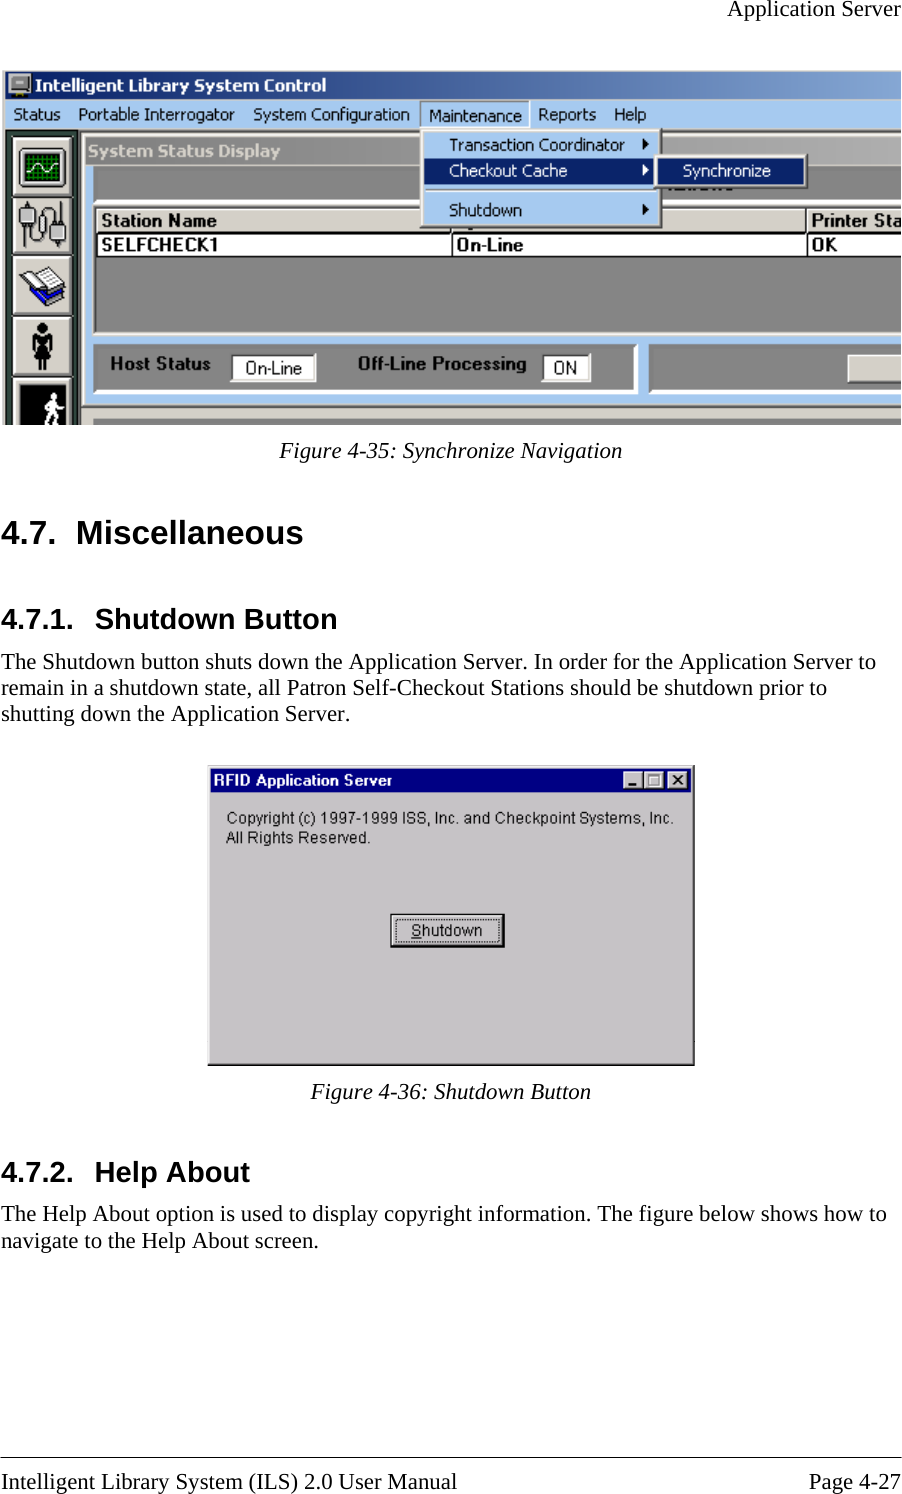   Application Server   Figure 4-35: Synchronize Navigation 4.7. Miscellaneous 4.7.1.  Shutdown Button  The Shutdown button shuts down the Application Server. In order for the Application Server to remain in a shutdown state, all Patron Self-Checkout Stations should be shutdown prior to shutting down the Application Server.   Figure 4-36: Shutdown Button 4.7.2. Help About The Help About option is used to display copyright information. The figure below shows how to navigate to the Help About screen.   Intelligent Library System (ILS) 2.0 User Manual  Page 4-27 